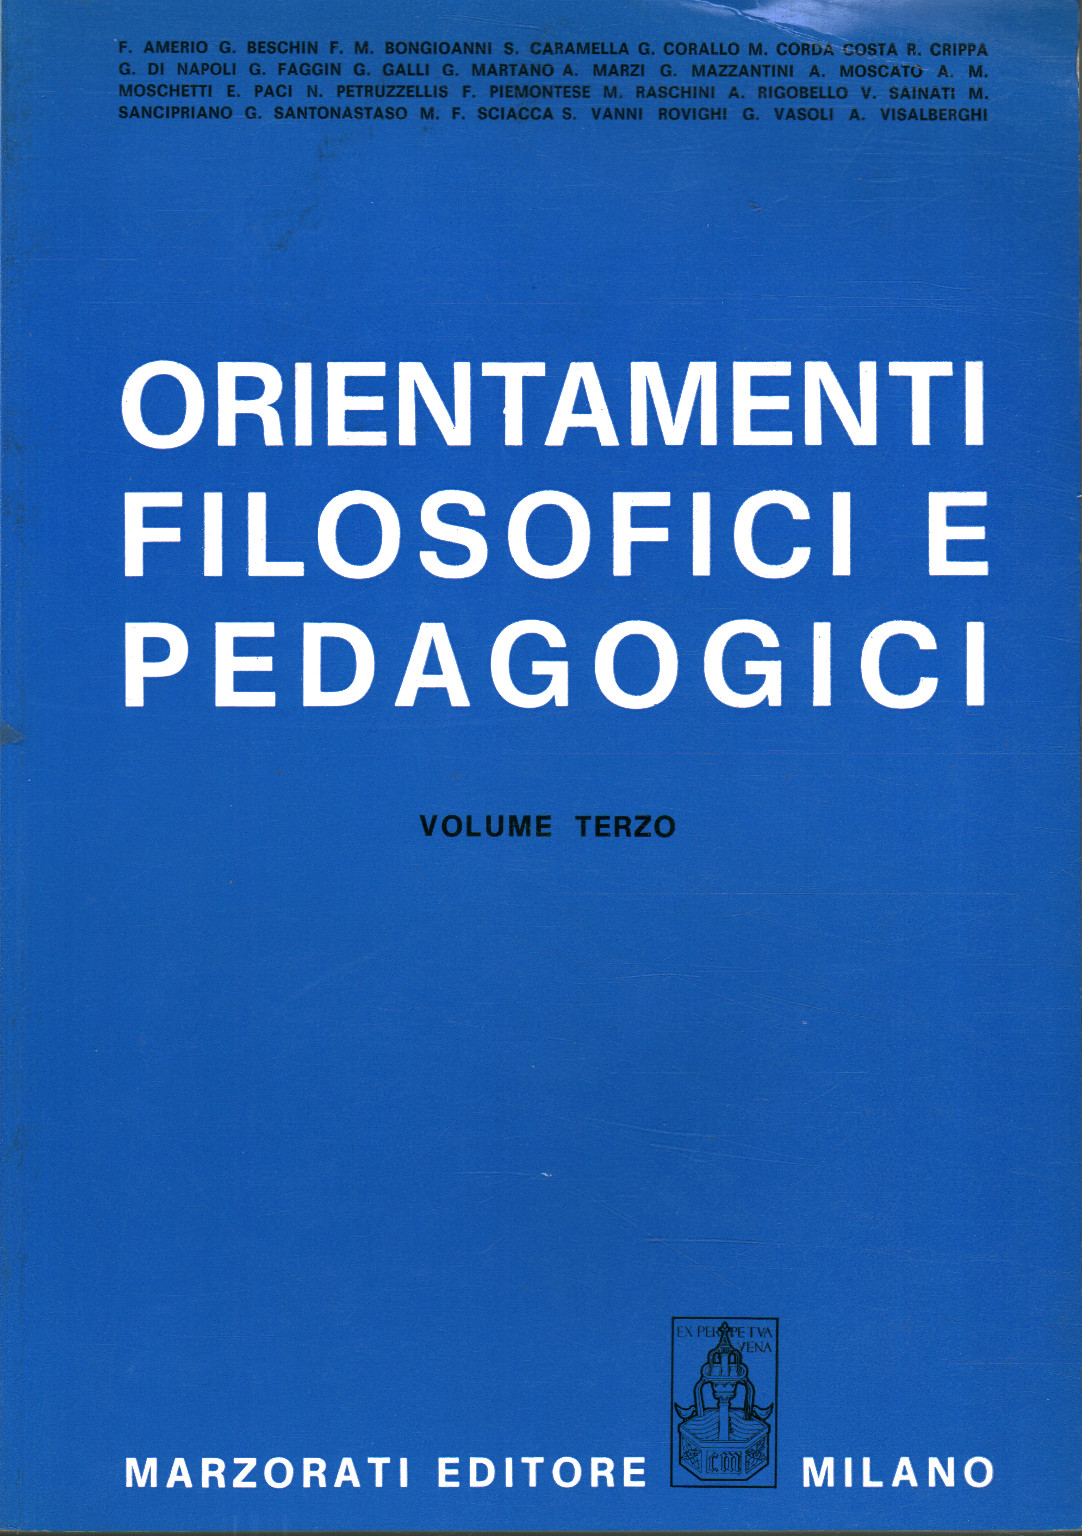 Philosophical and pedagogical orientations (third volume)